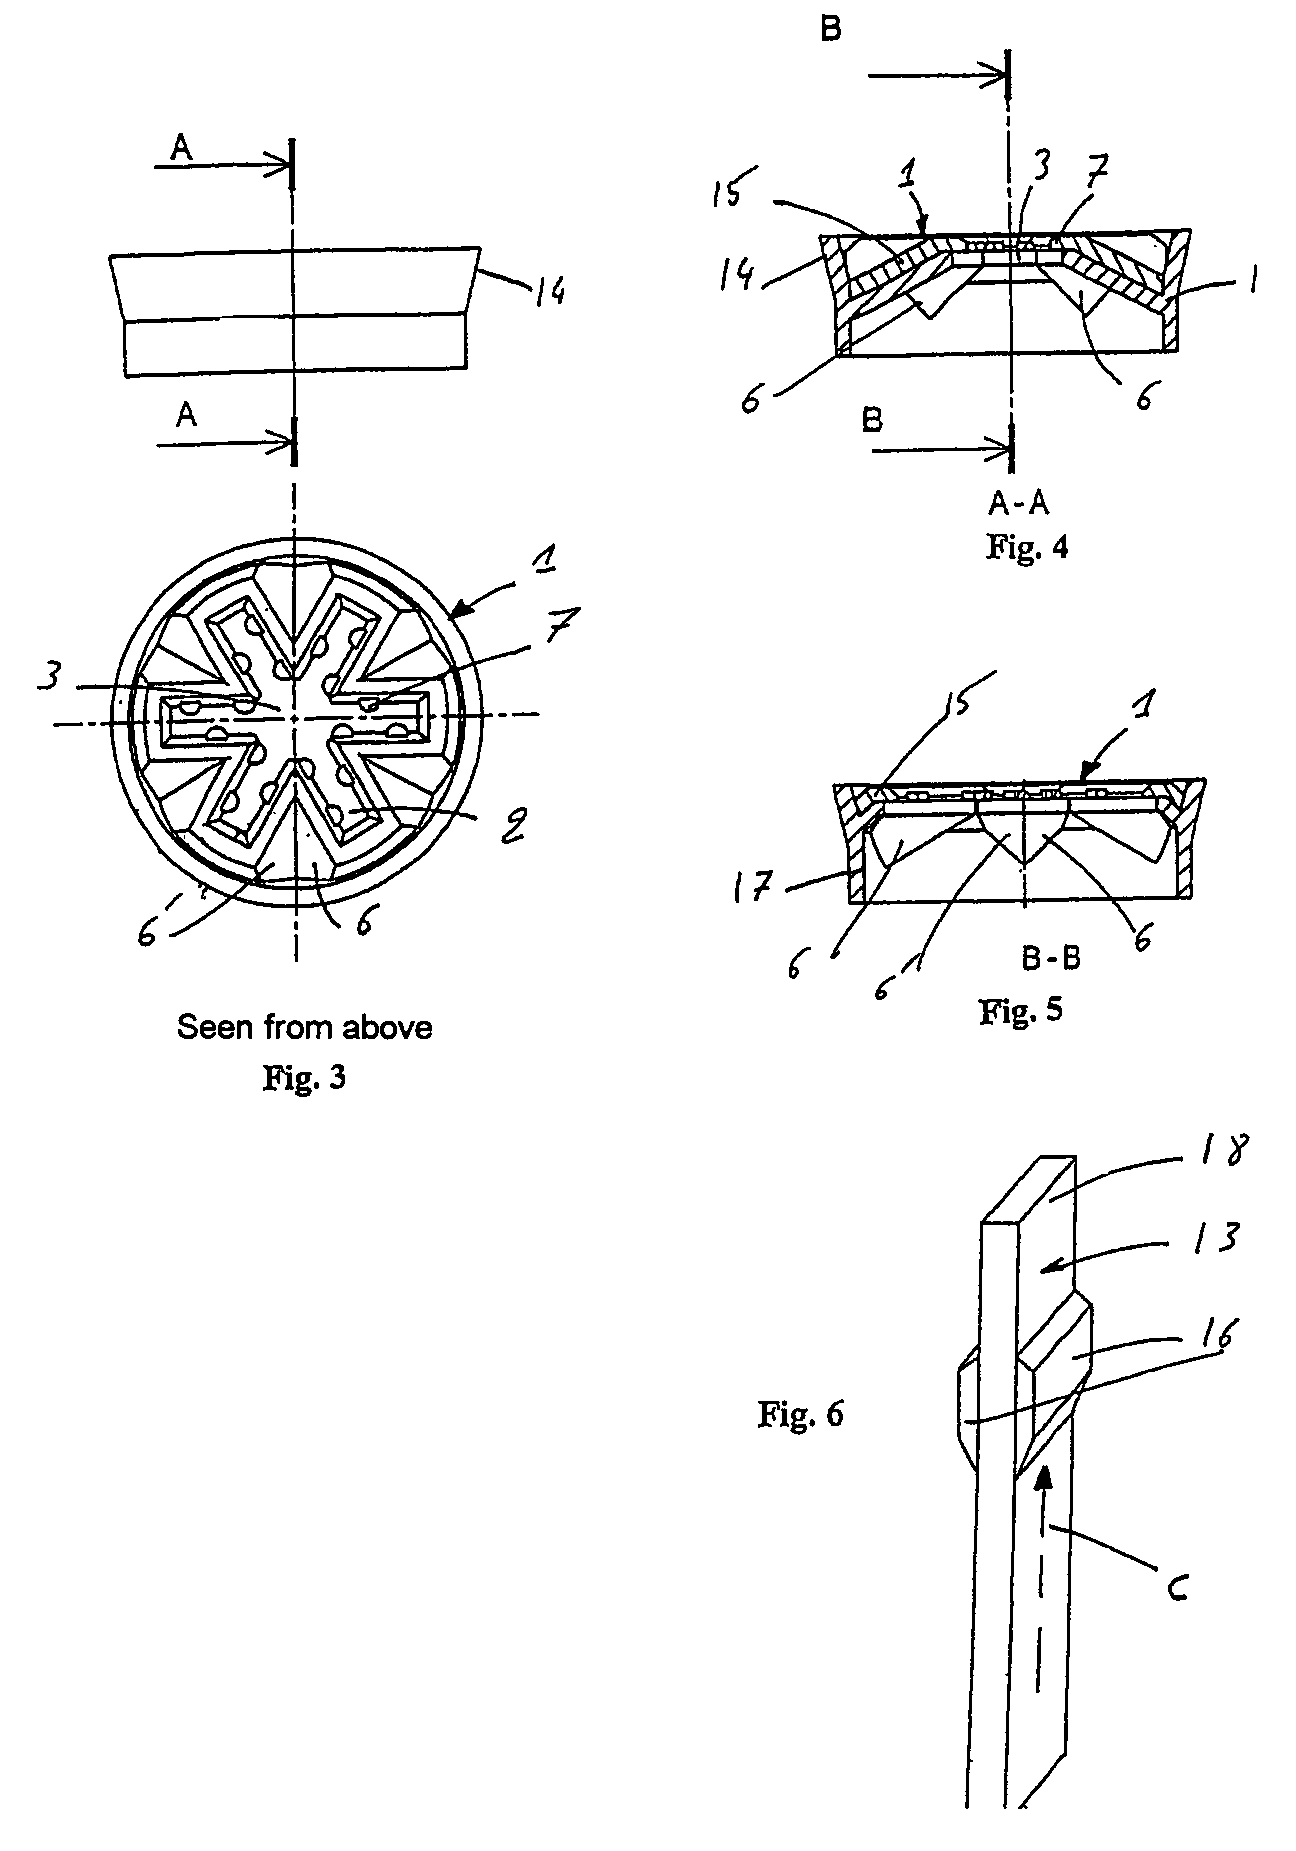 Device for dispensing oblong objects, comprising one main opening and at least one other elongated opening